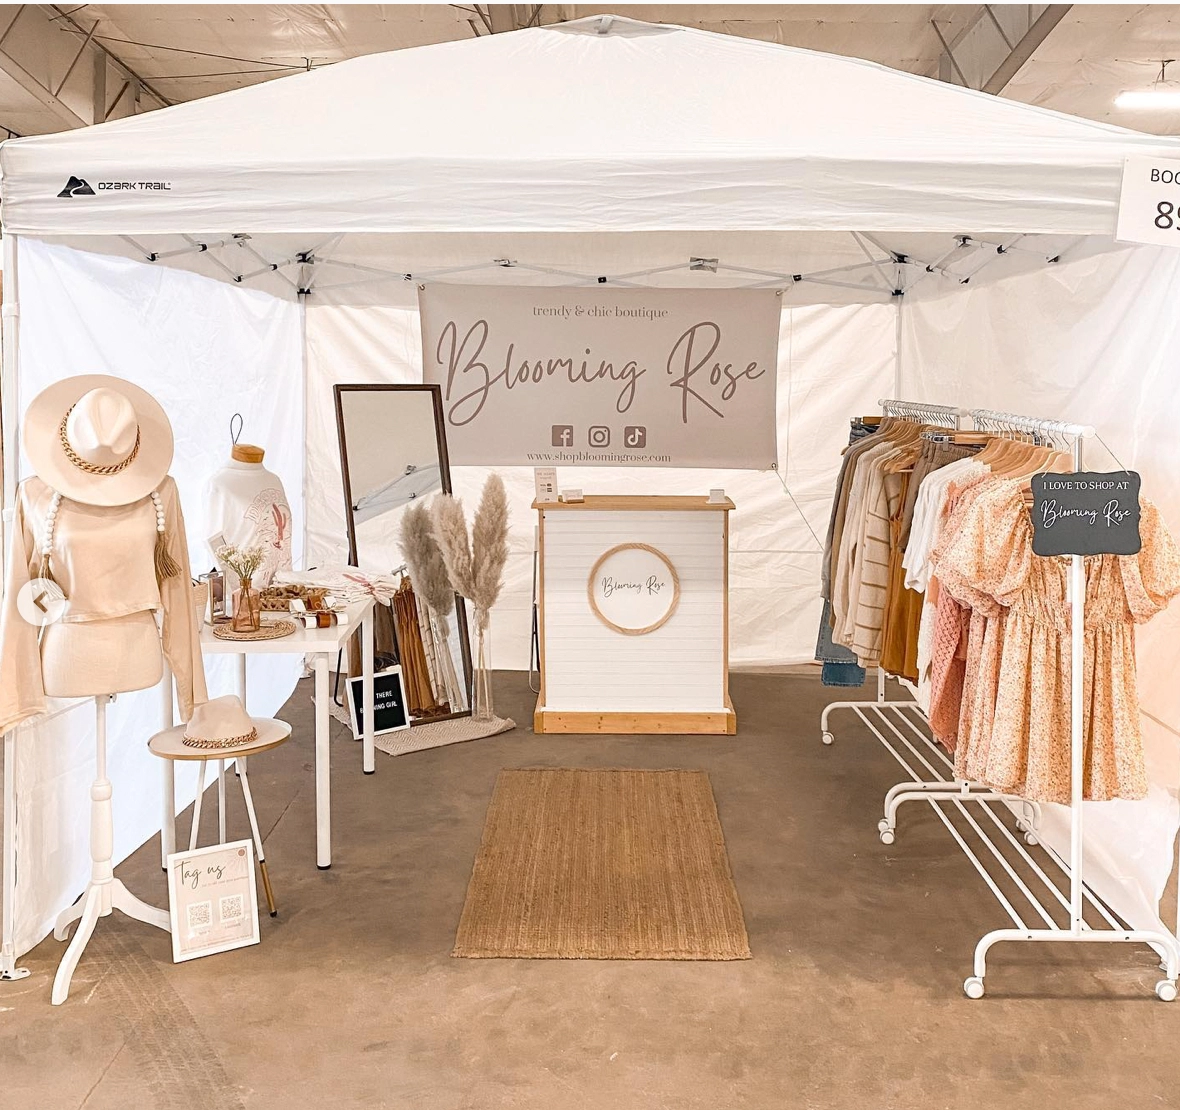 A small pop up shop selling bohemian women clothes